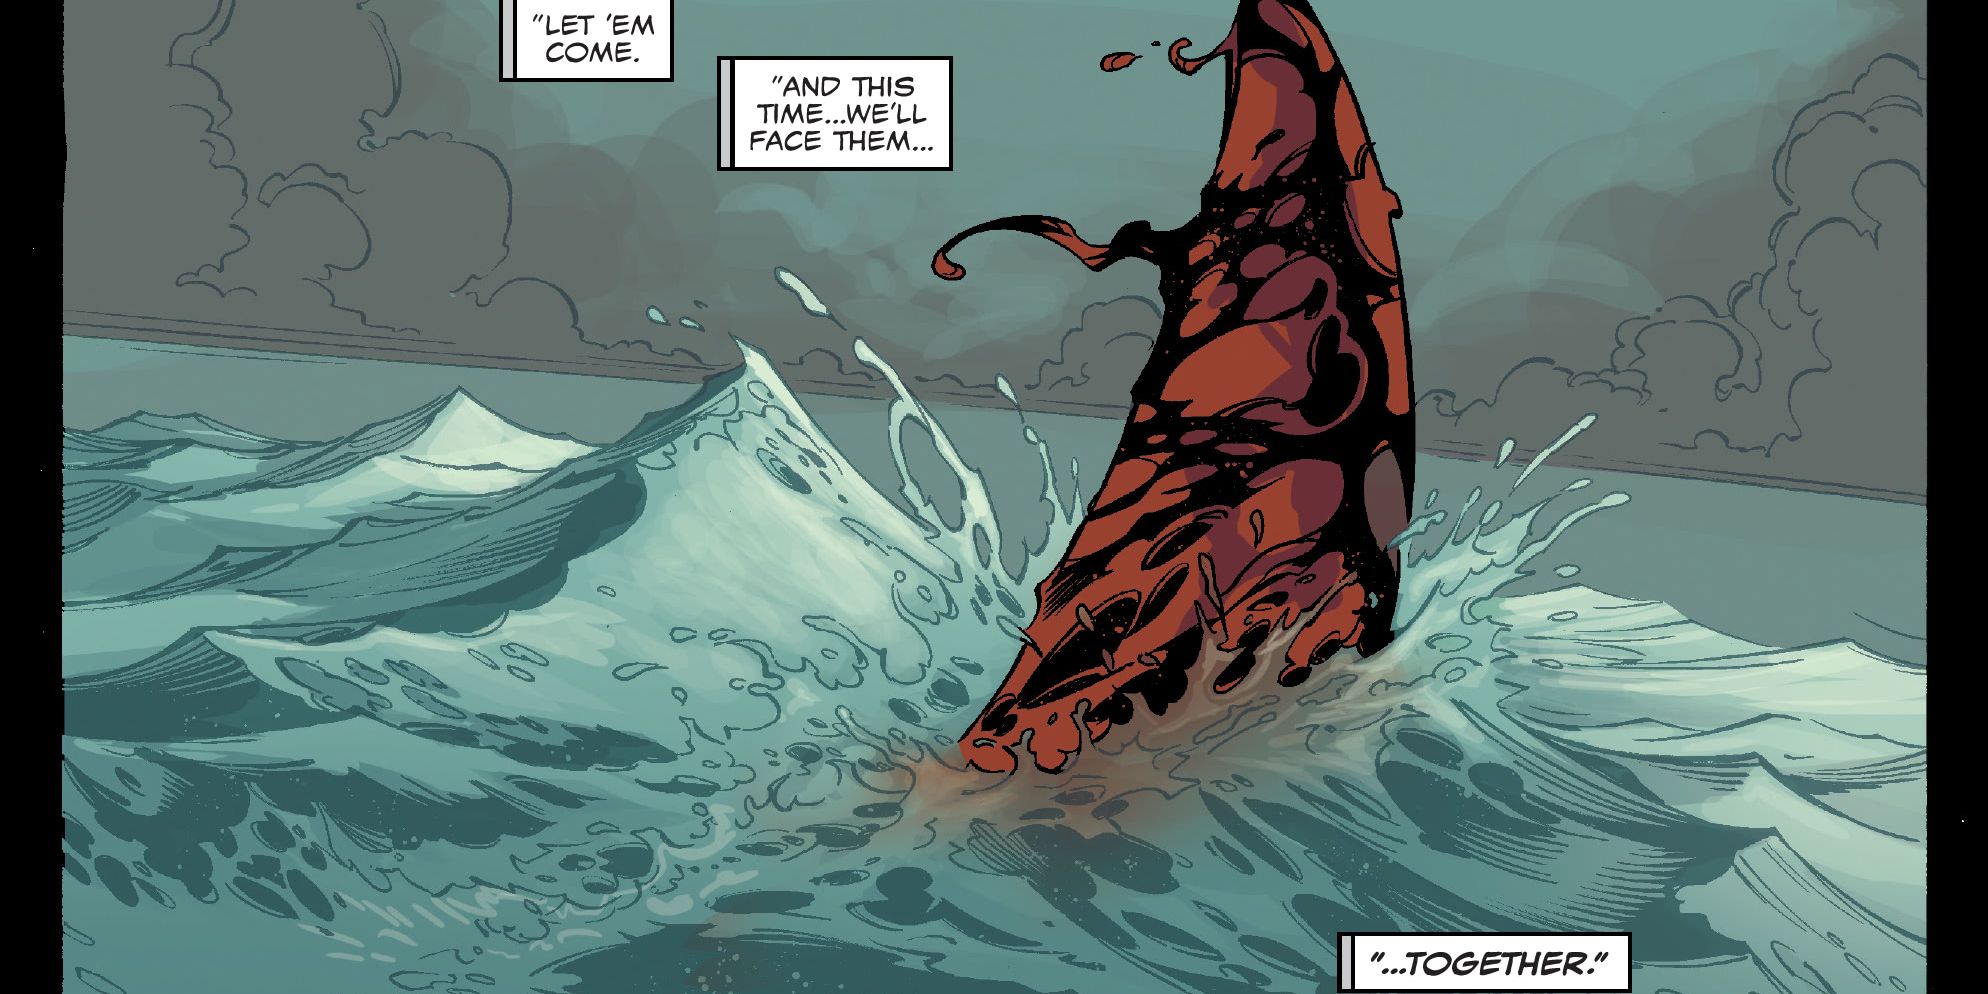 Carnage as a shark swimming in the ocean